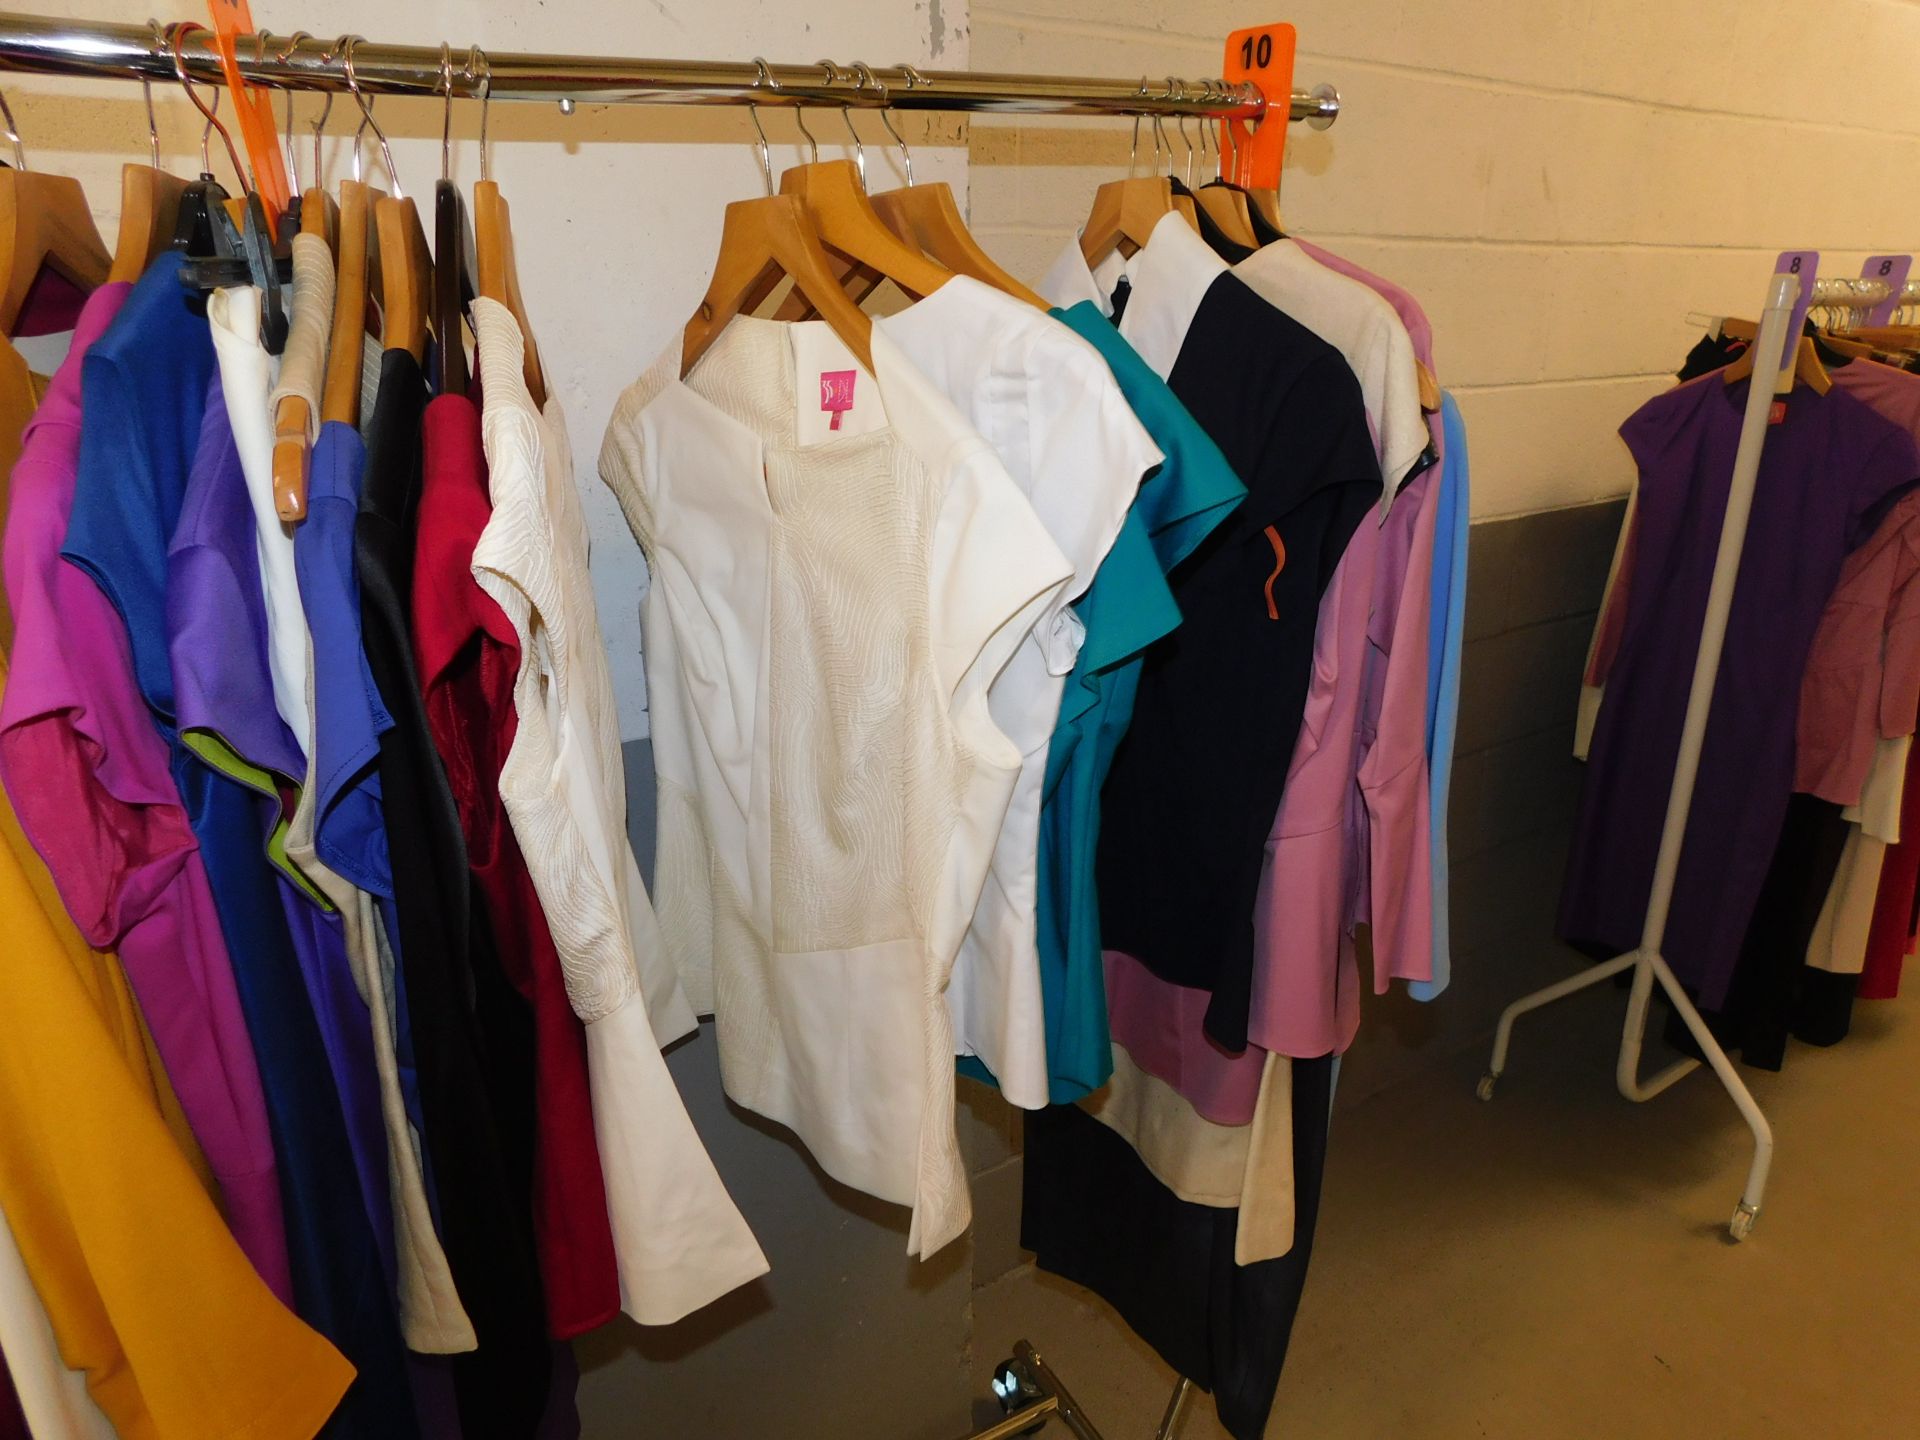 Contents of Rail of 35 Dresses/Tops of "Number 35" Ladies Business Wear, Size 10  (Location Stockpor - Image 5 of 6